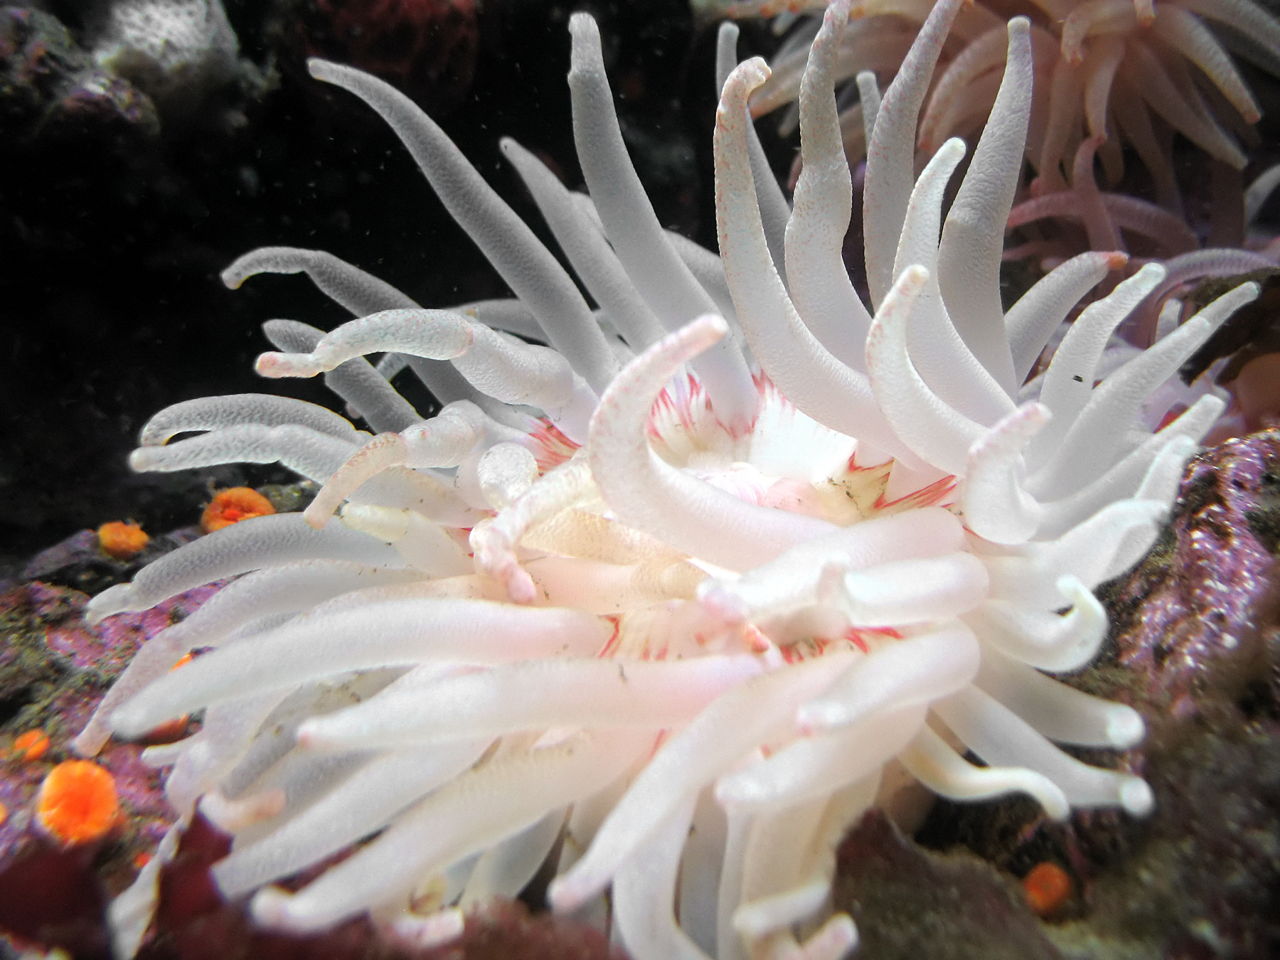 A Sea Anemone Fascinating Facts About Sea Anemones You Never Knew.